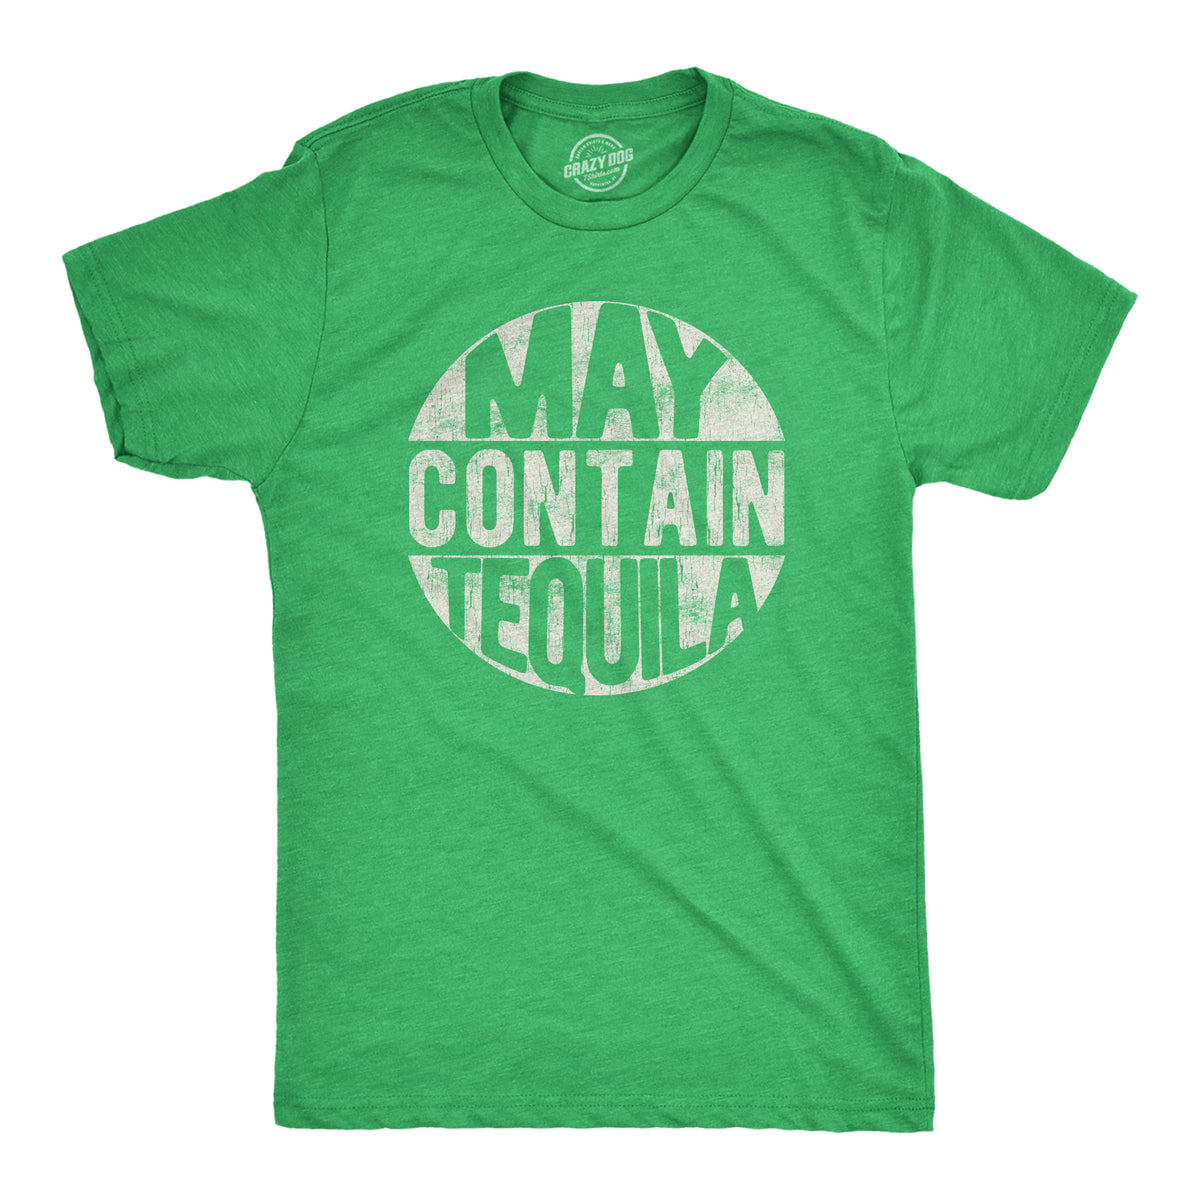 Funny Heather Green - Contain Tequila May Contain Tequila Mens T Shirt Nerdy Cinco De Mayo Food Tee